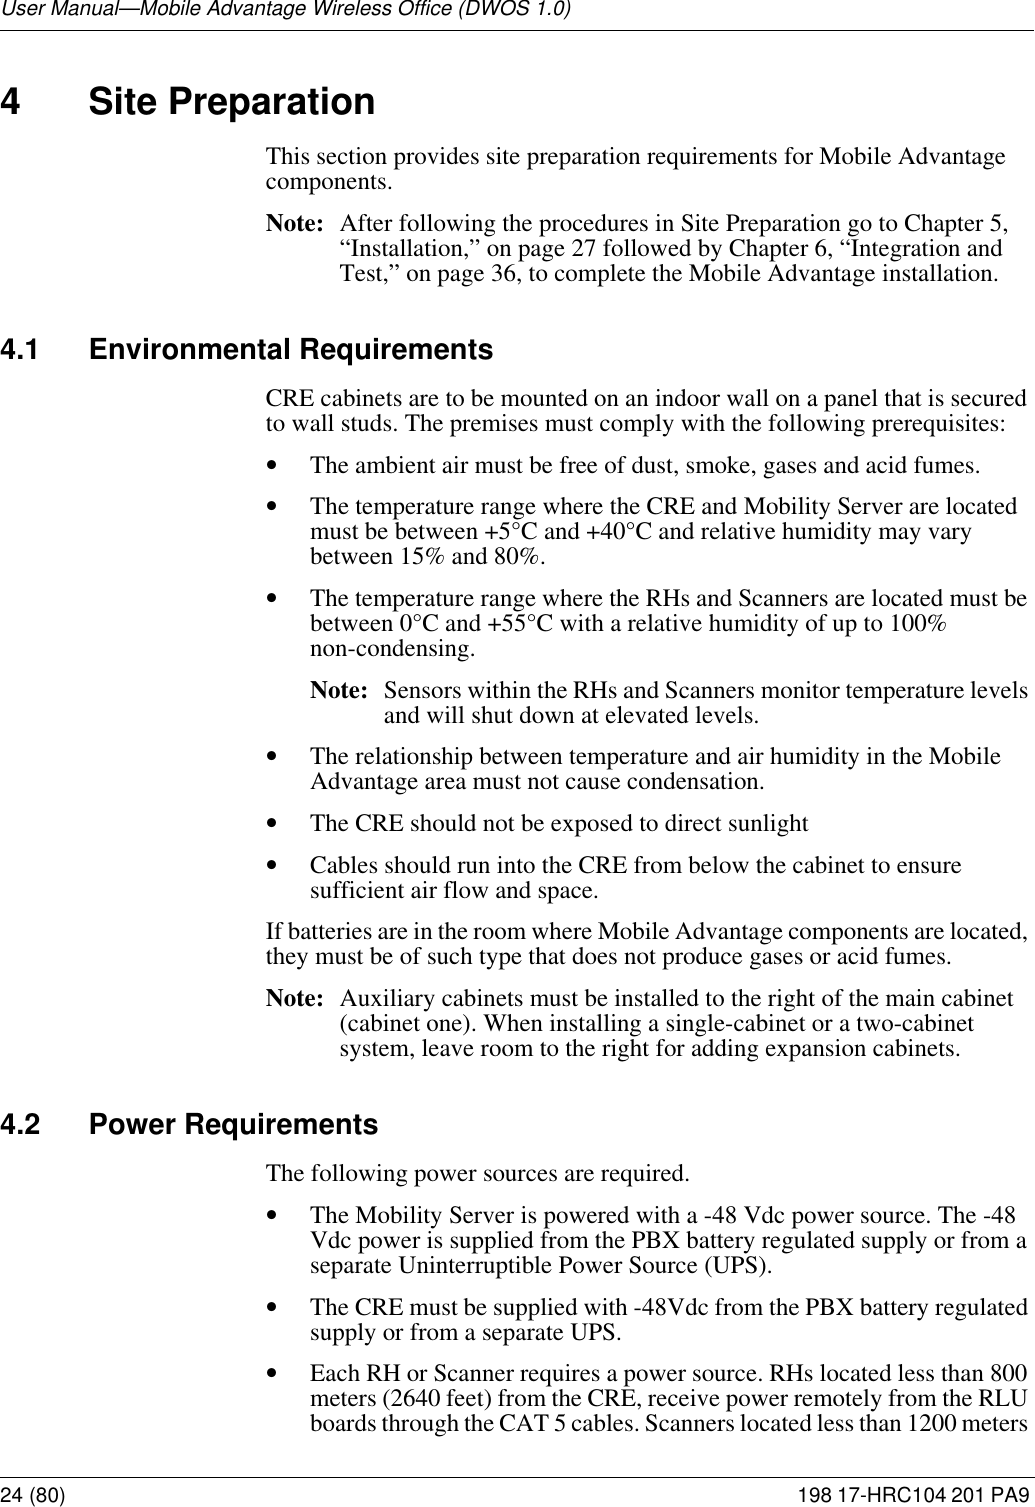 User Manual—Mobile Advantage Wireless Office (DWOS 1.0)24 (80) 198 17-HRC104 201 PA9 4 Site PreparationThis section provides site preparation requirements for Mobile Advantage components. Note: After following the procedures in Site Preparation go to Chapter 5, “Installation,” on page 27 followed by Chapter 6, “Integration and Test,” on page 36, to complete the Mobile Advantage installation.4.1 Environmental RequirementsCRE cabinets are to be mounted on an indoor wall on a panel that is secured to wall studs. The premises must comply with the following prerequisites:•The ambient air must be free of dust, smoke, gases and acid fumes.•The temperature range where the CRE and Mobility Server are located must be between +5°C and +40°C and relative humidity may vary between 15% and 80%.•The temperature range where the RHs and Scanners are located must be between 0°C and +55°C with a relative humidity of up to 100% non-condensing. Note: Sensors within the RHs and Scanners monitor temperature levels and will shut down at elevated levels.•The relationship between temperature and air humidity in the Mobile Advantage area must not cause condensation.•The CRE should not be exposed to direct sunlight•Cables should run into the CRE from below the cabinet to ensure sufficient air flow and space.If batteries are in the room where Mobile Advantage components are located, they must be of such type that does not produce gases or acid fumes.Note: Auxiliary cabinets must be installed to the right of the main cabinet (cabinet one). When installing a single-cabinet or a two-cabinet system, leave room to the right for adding expansion cabinets. 4.2 Power RequirementsThe following power sources are required.•The Mobility Server is powered with a -48 Vdc power source. The -48 Vdc power is supplied from the PBX battery regulated supply or from a separate Uninterruptible Power Source (UPS). •The CRE must be supplied with -48Vdc from the PBX battery regulated supply or from a separate UPS.•Each RH or Scanner requires a power source. RHs located less than 800 meters (2640 feet) from the CRE, receive power remotely from the RLU boards through the CAT 5 cables. Scanners located less than 1200 meters 